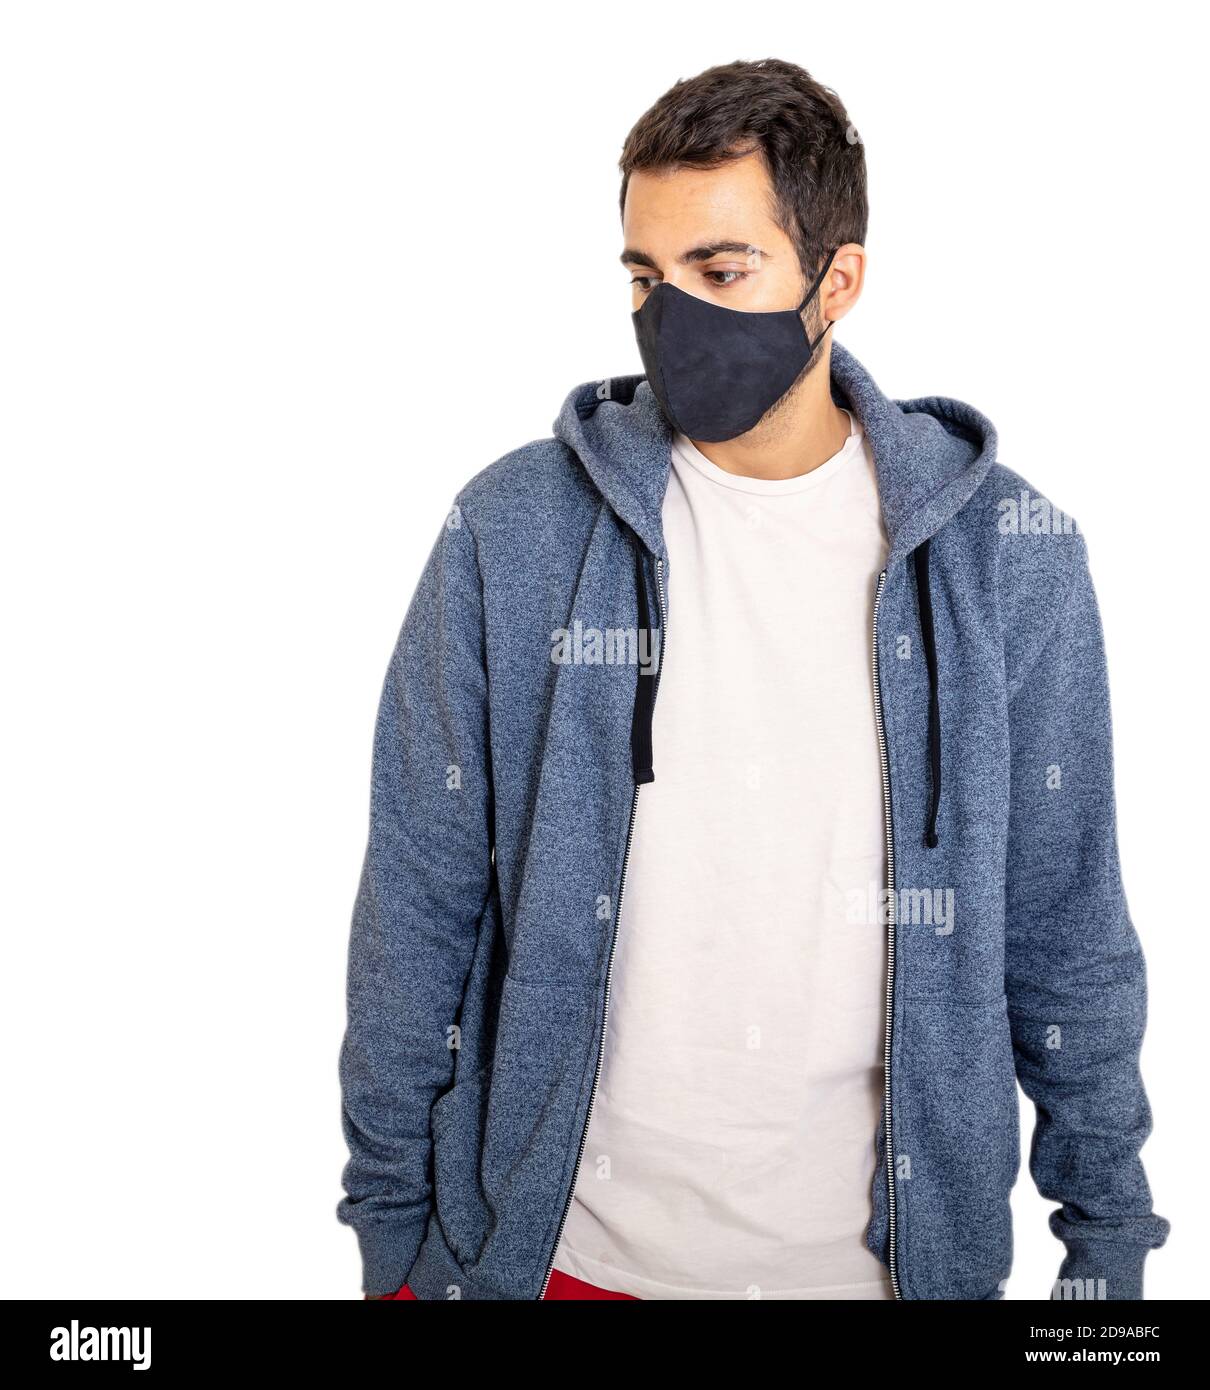 Coronavirus days, man with COVID 19 protective face mask, wearing a blank tshirt and gray color hoodie isolated against white background, closeup view Stock Photo